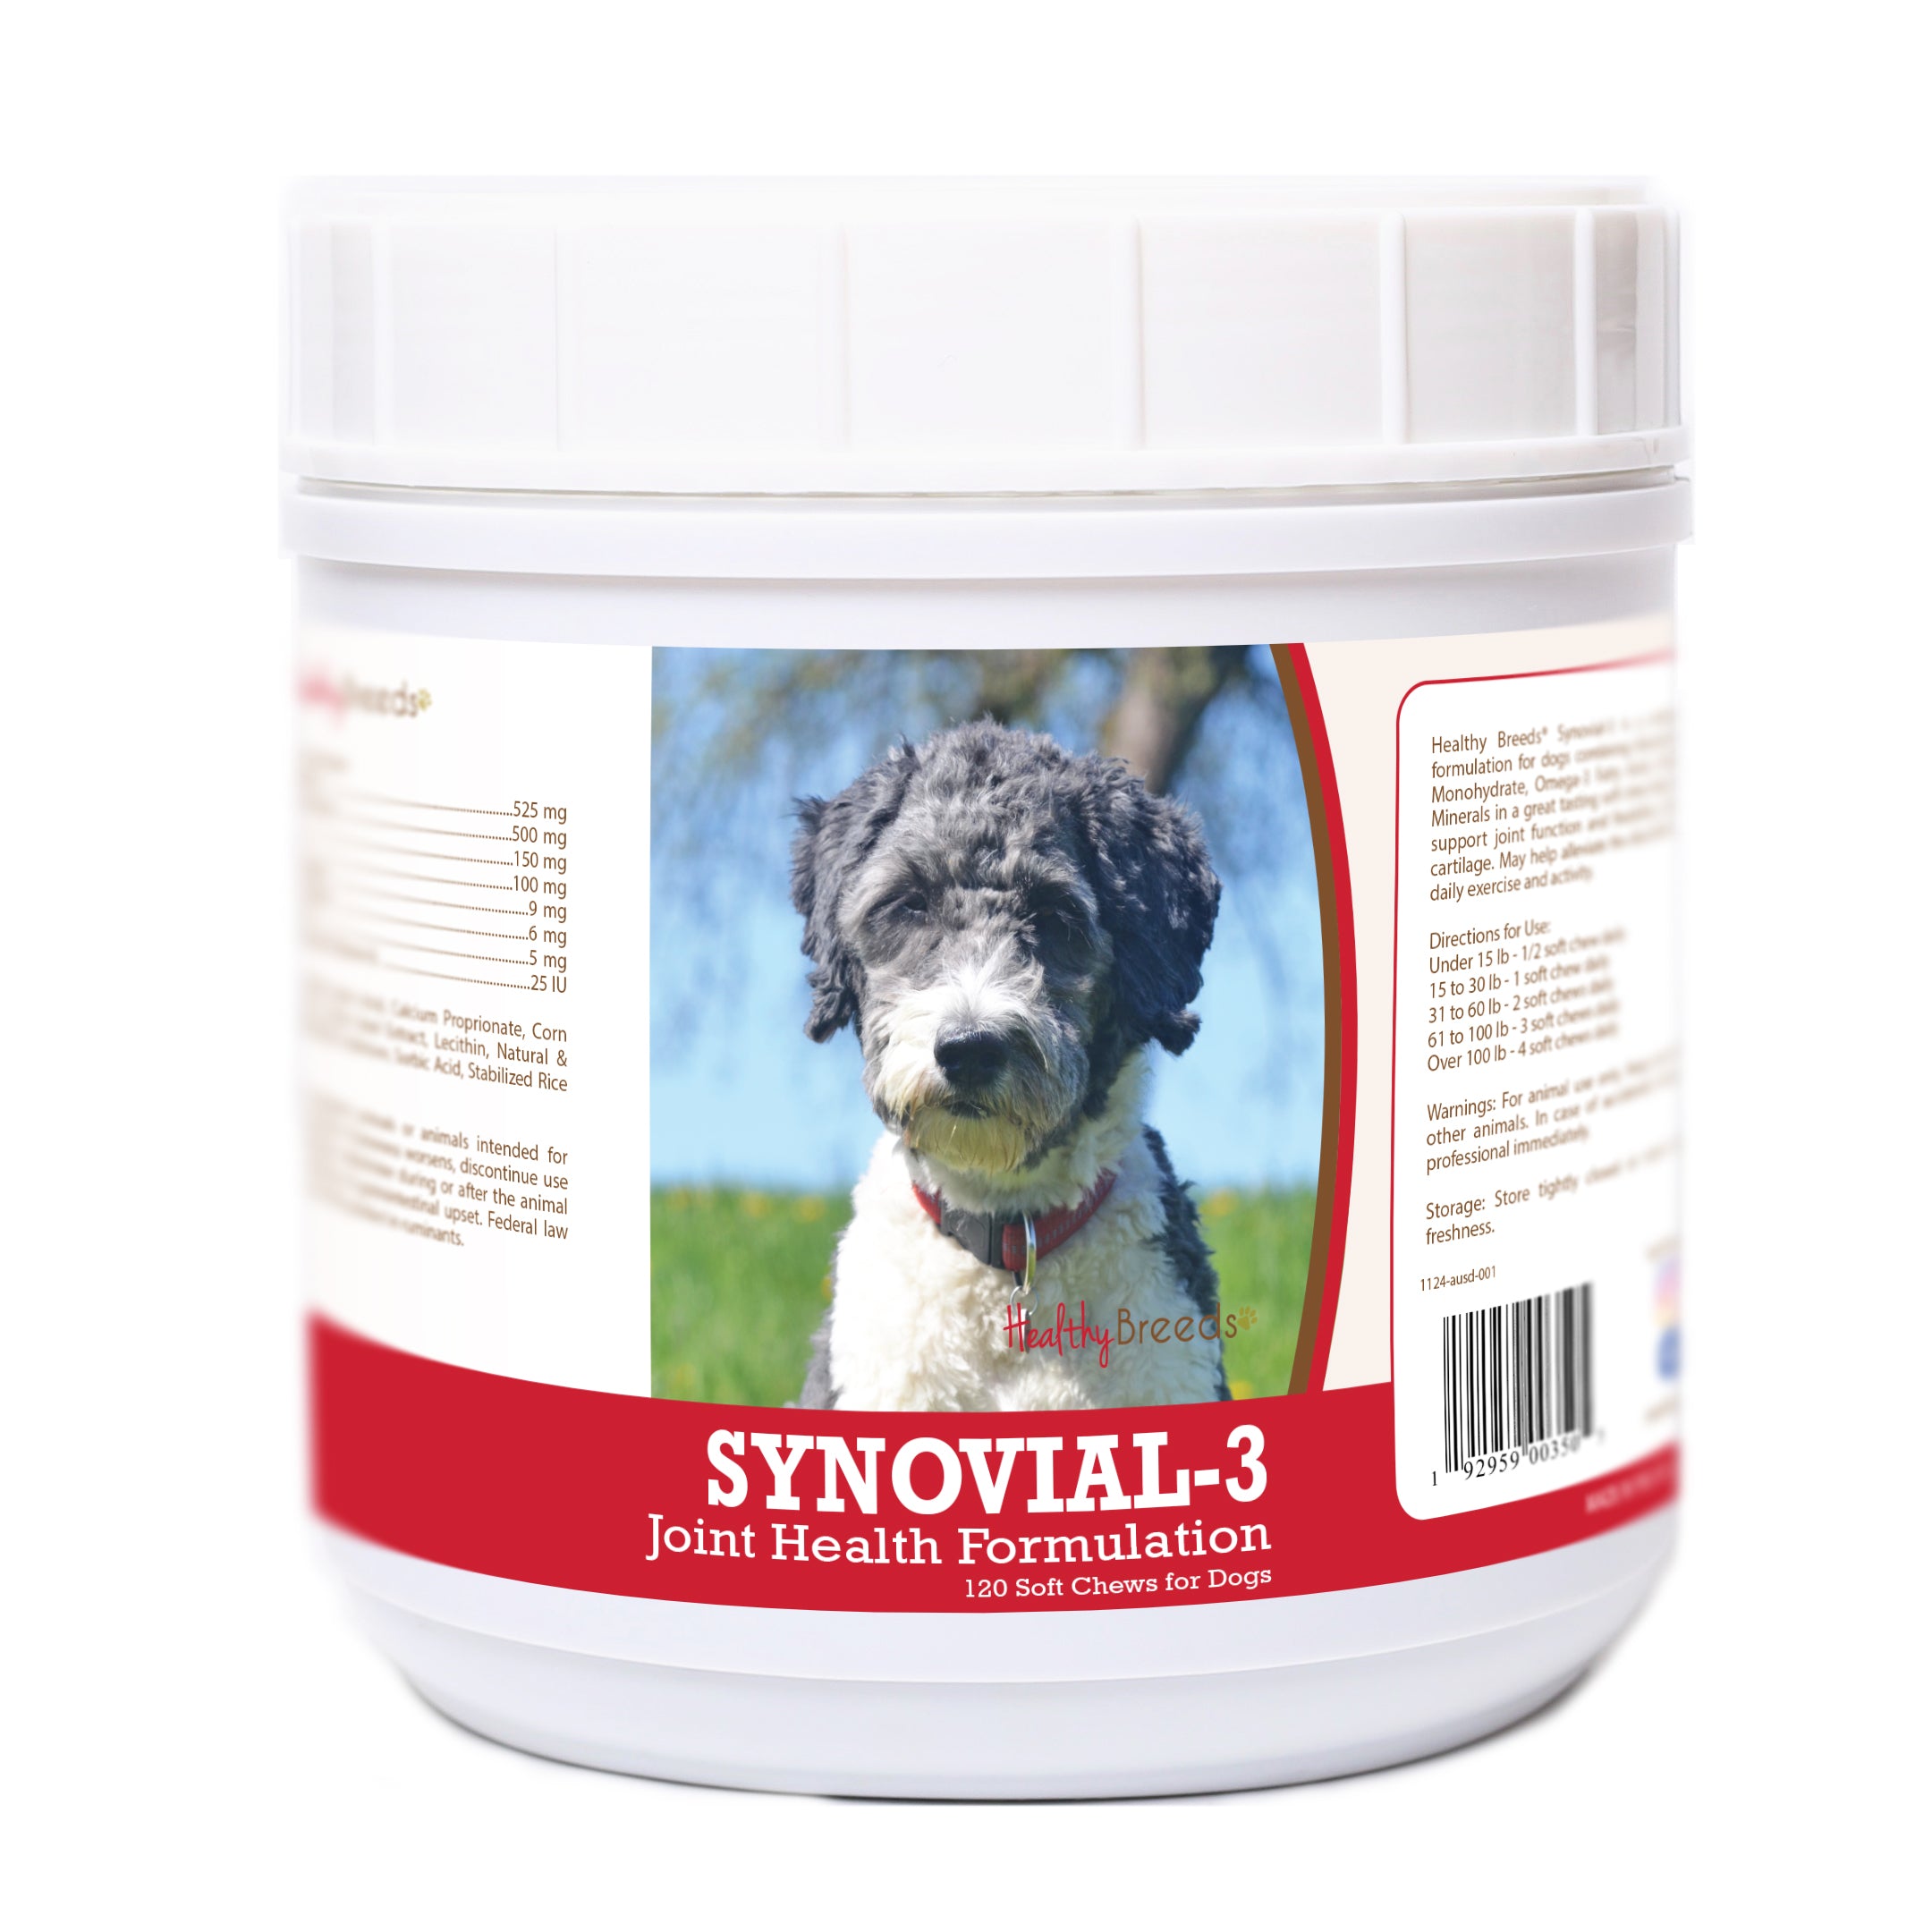 Aussiedoodle Synovial-3 Joint Health Formulation Soft Chews 120 Count